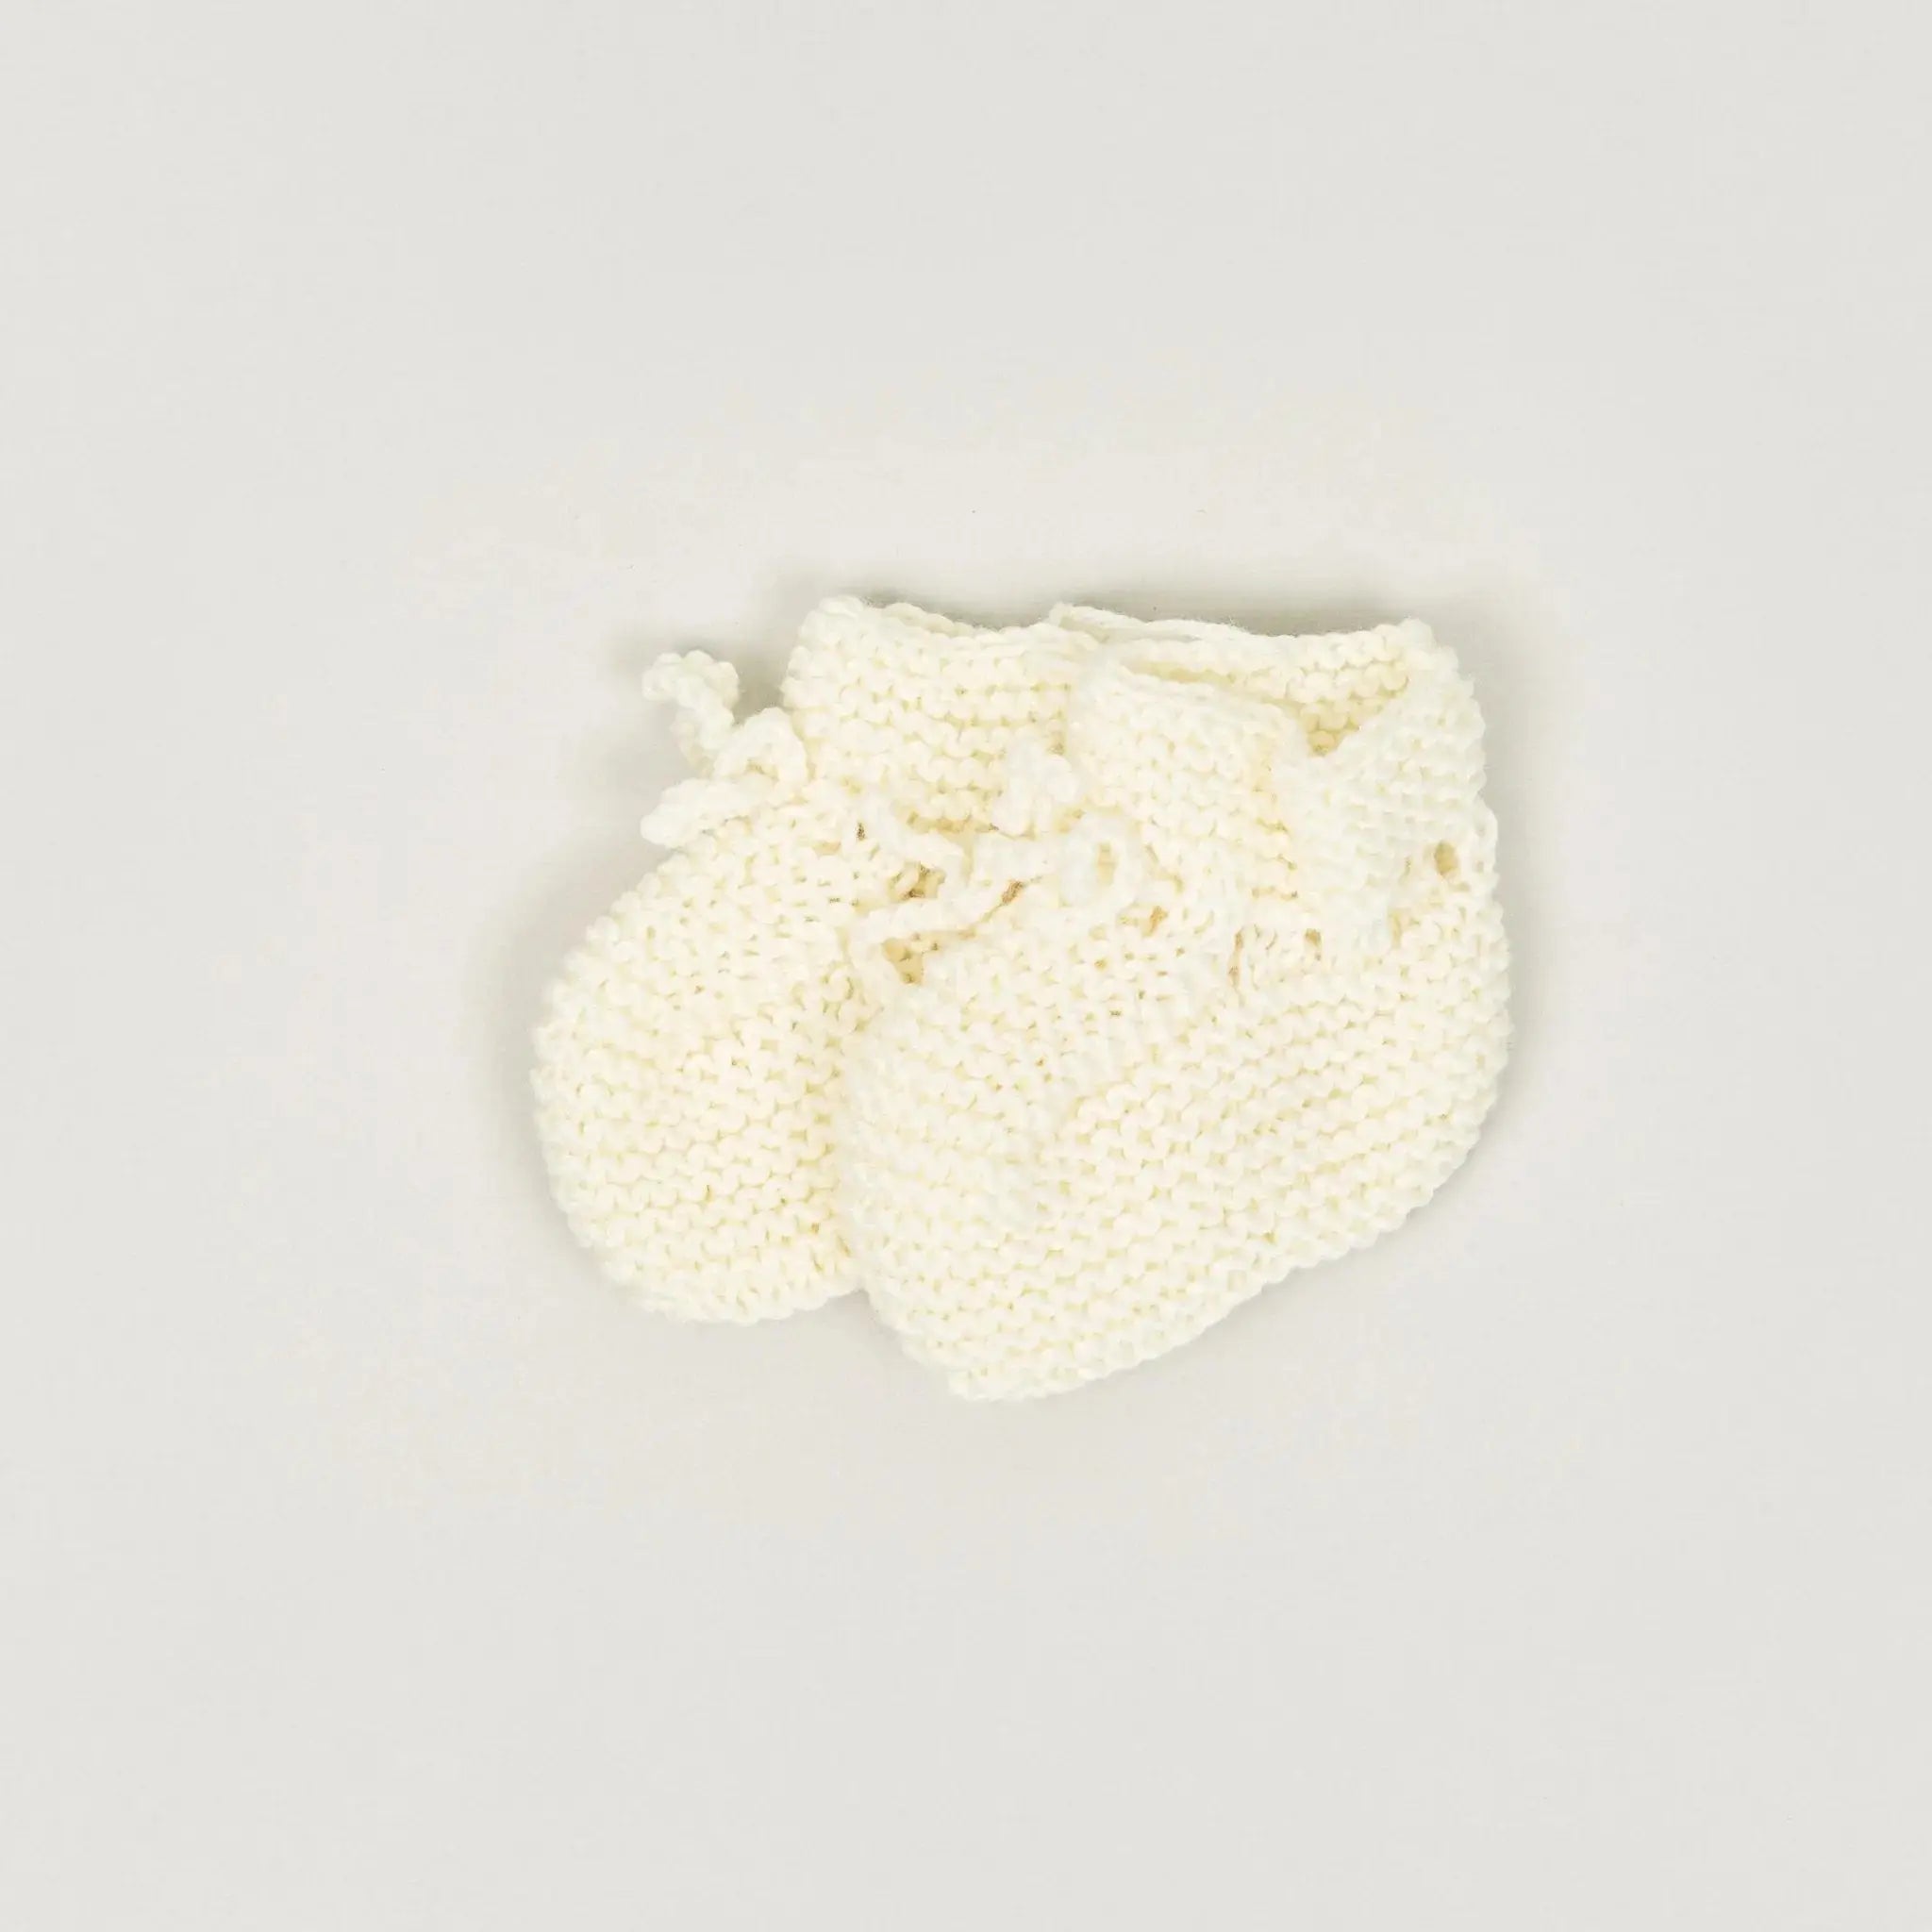 Baby knit booties made of wool for premature babies and multiple births